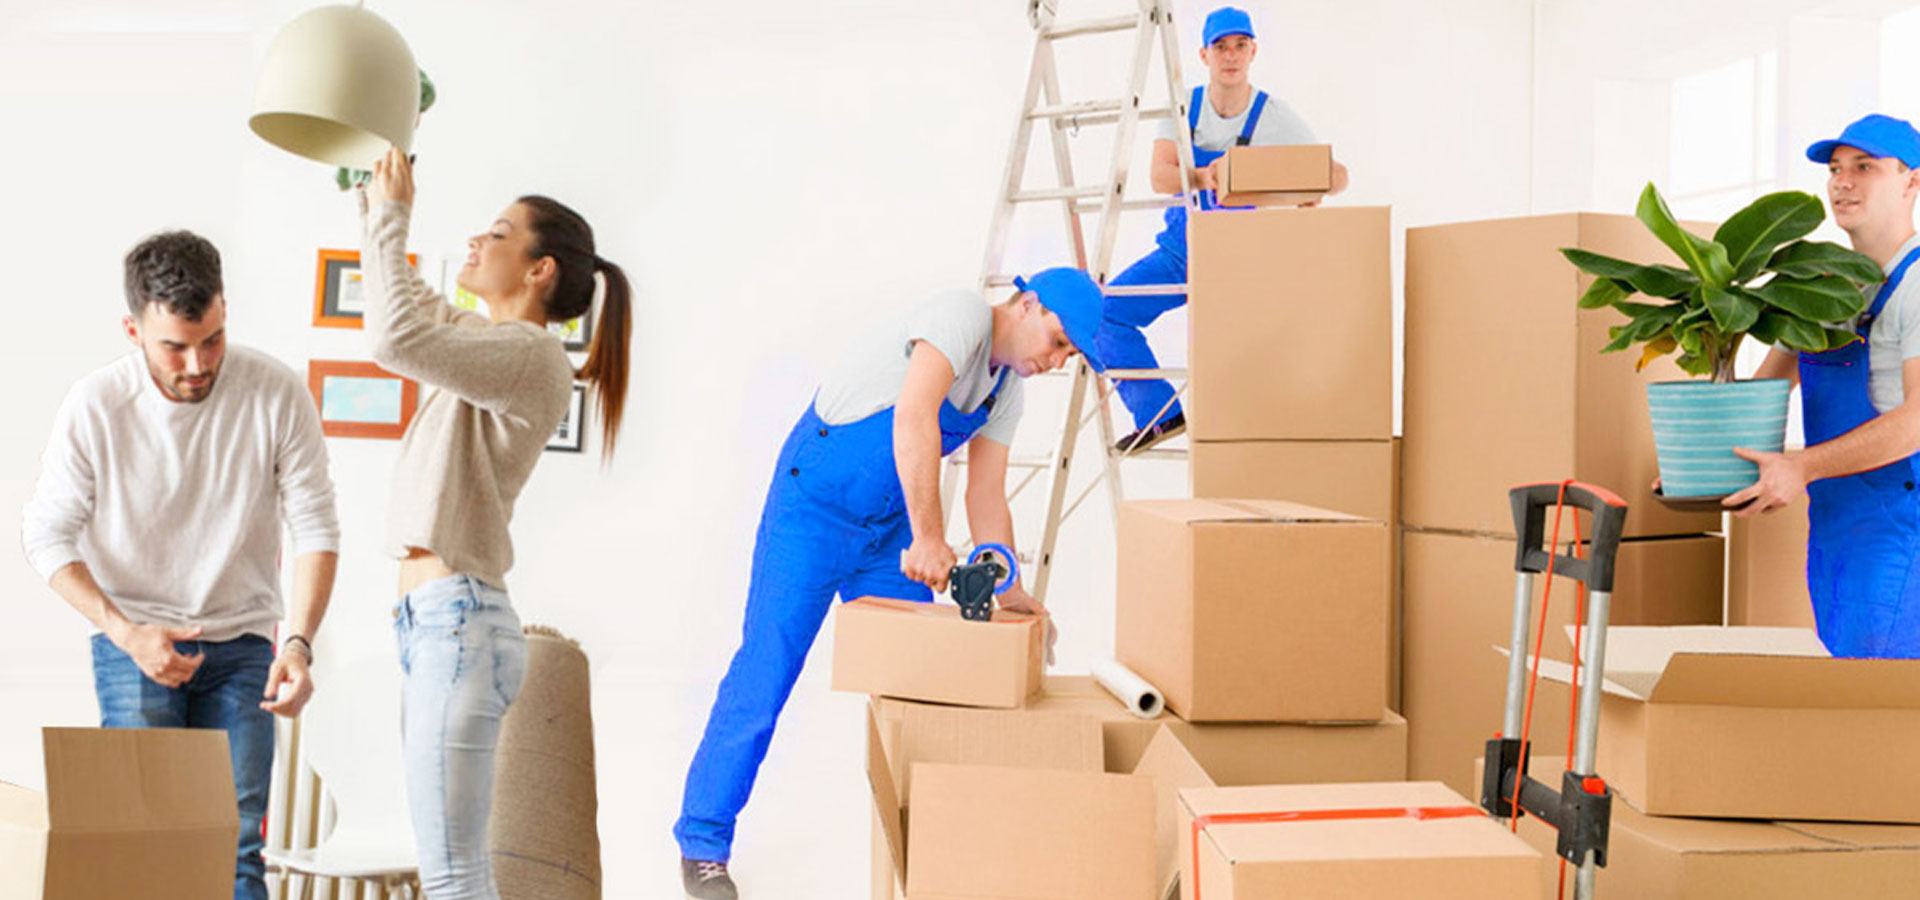 Home Movers Services in London